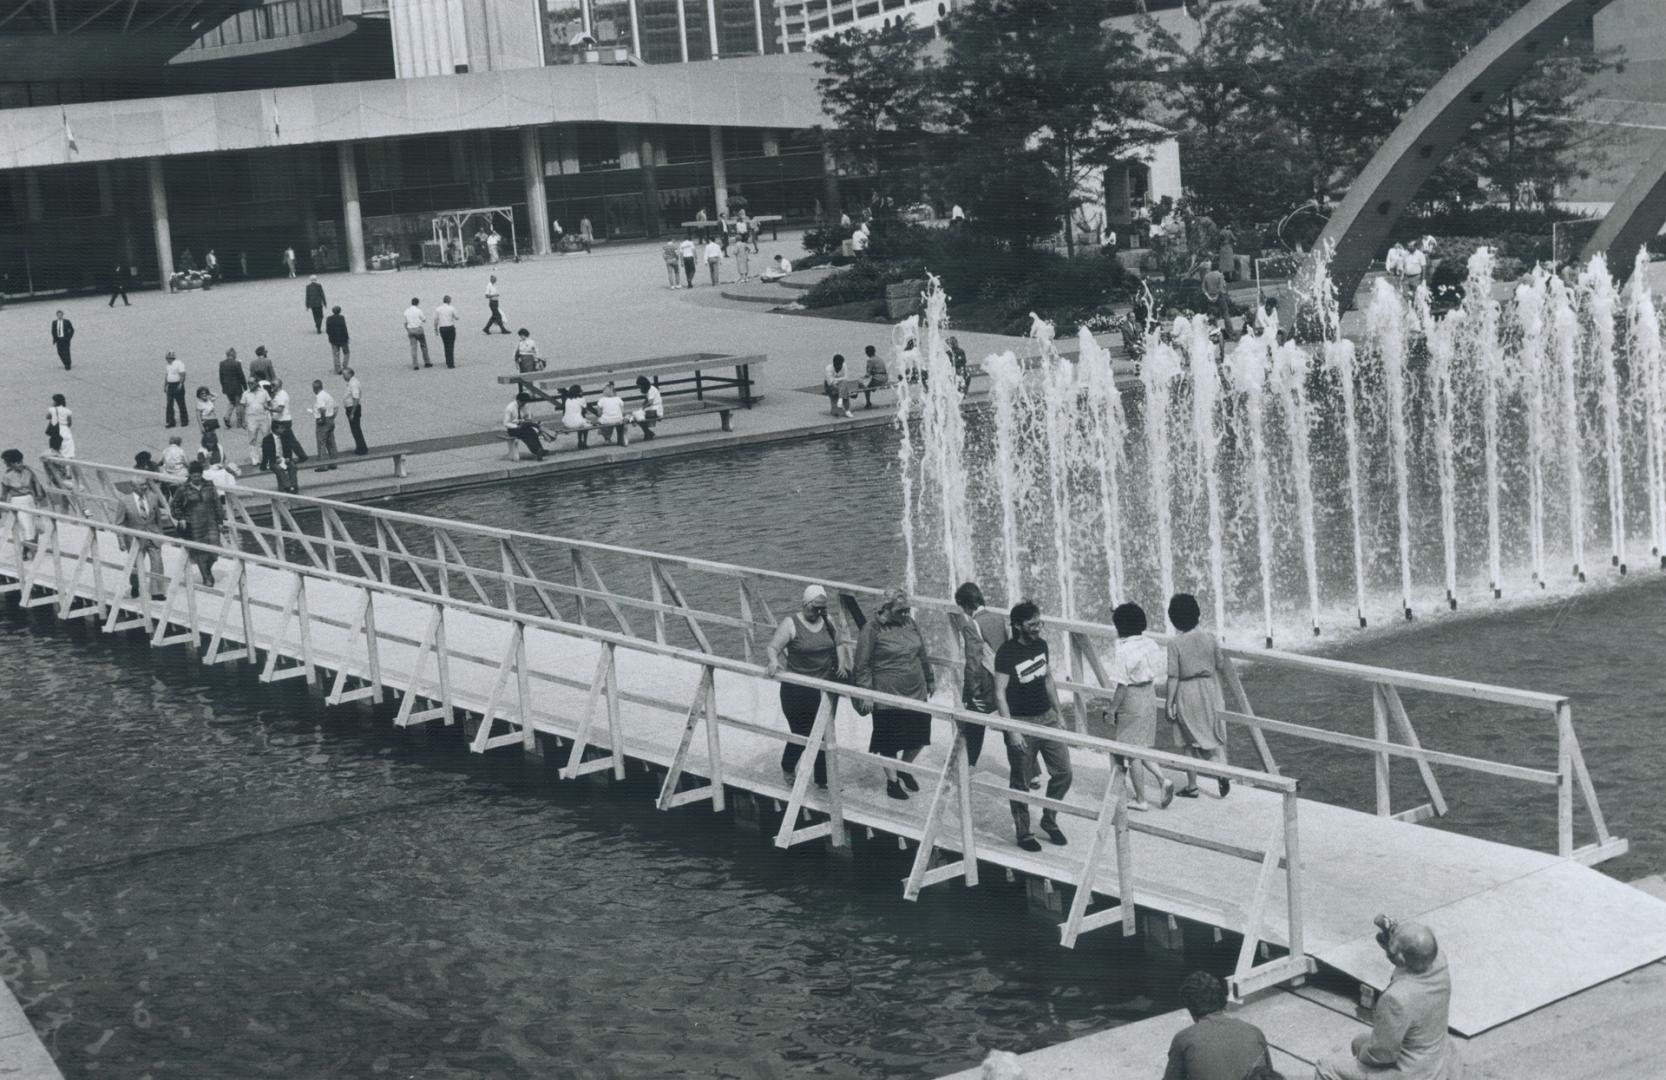 A bridge over bubbled waters, This temporary wooden bridge over the Toronto City Hall reflecting pool is the latest addition to Nathan Phillips Square